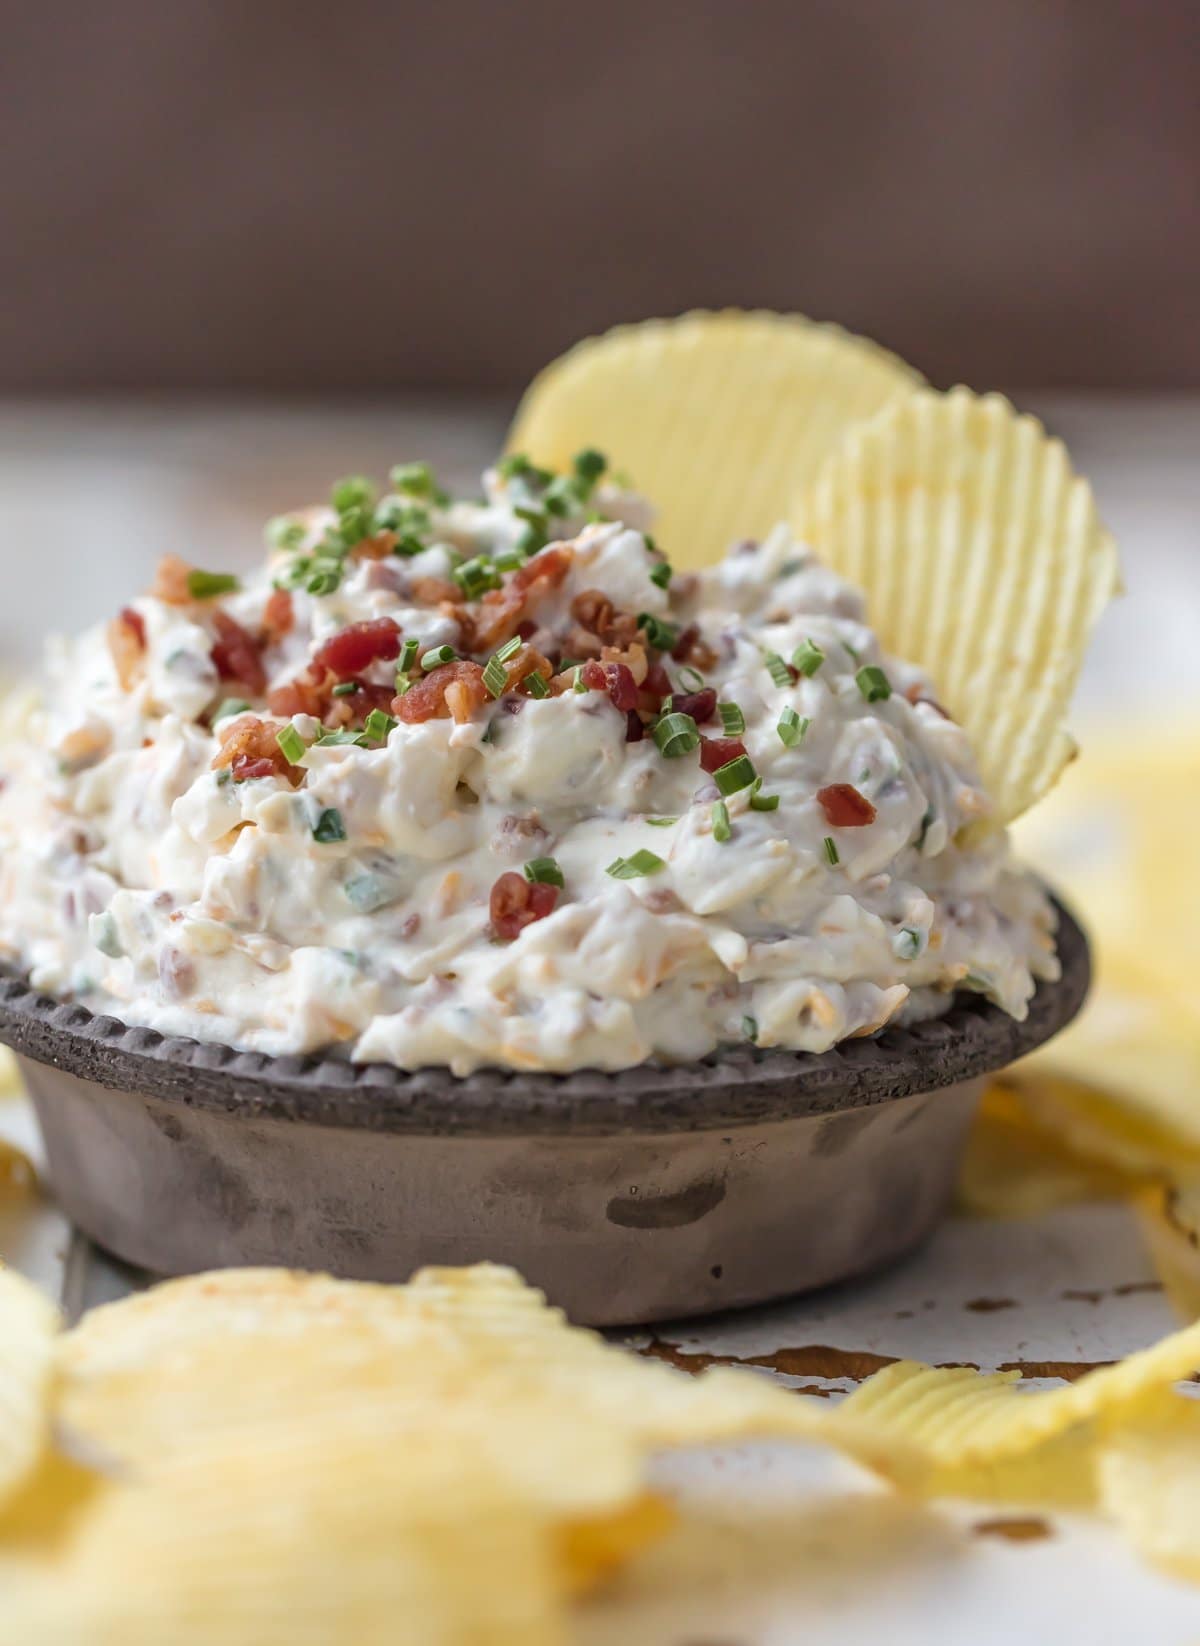 Easy cold dip recipe: sour cream, onions, bacon, and chives